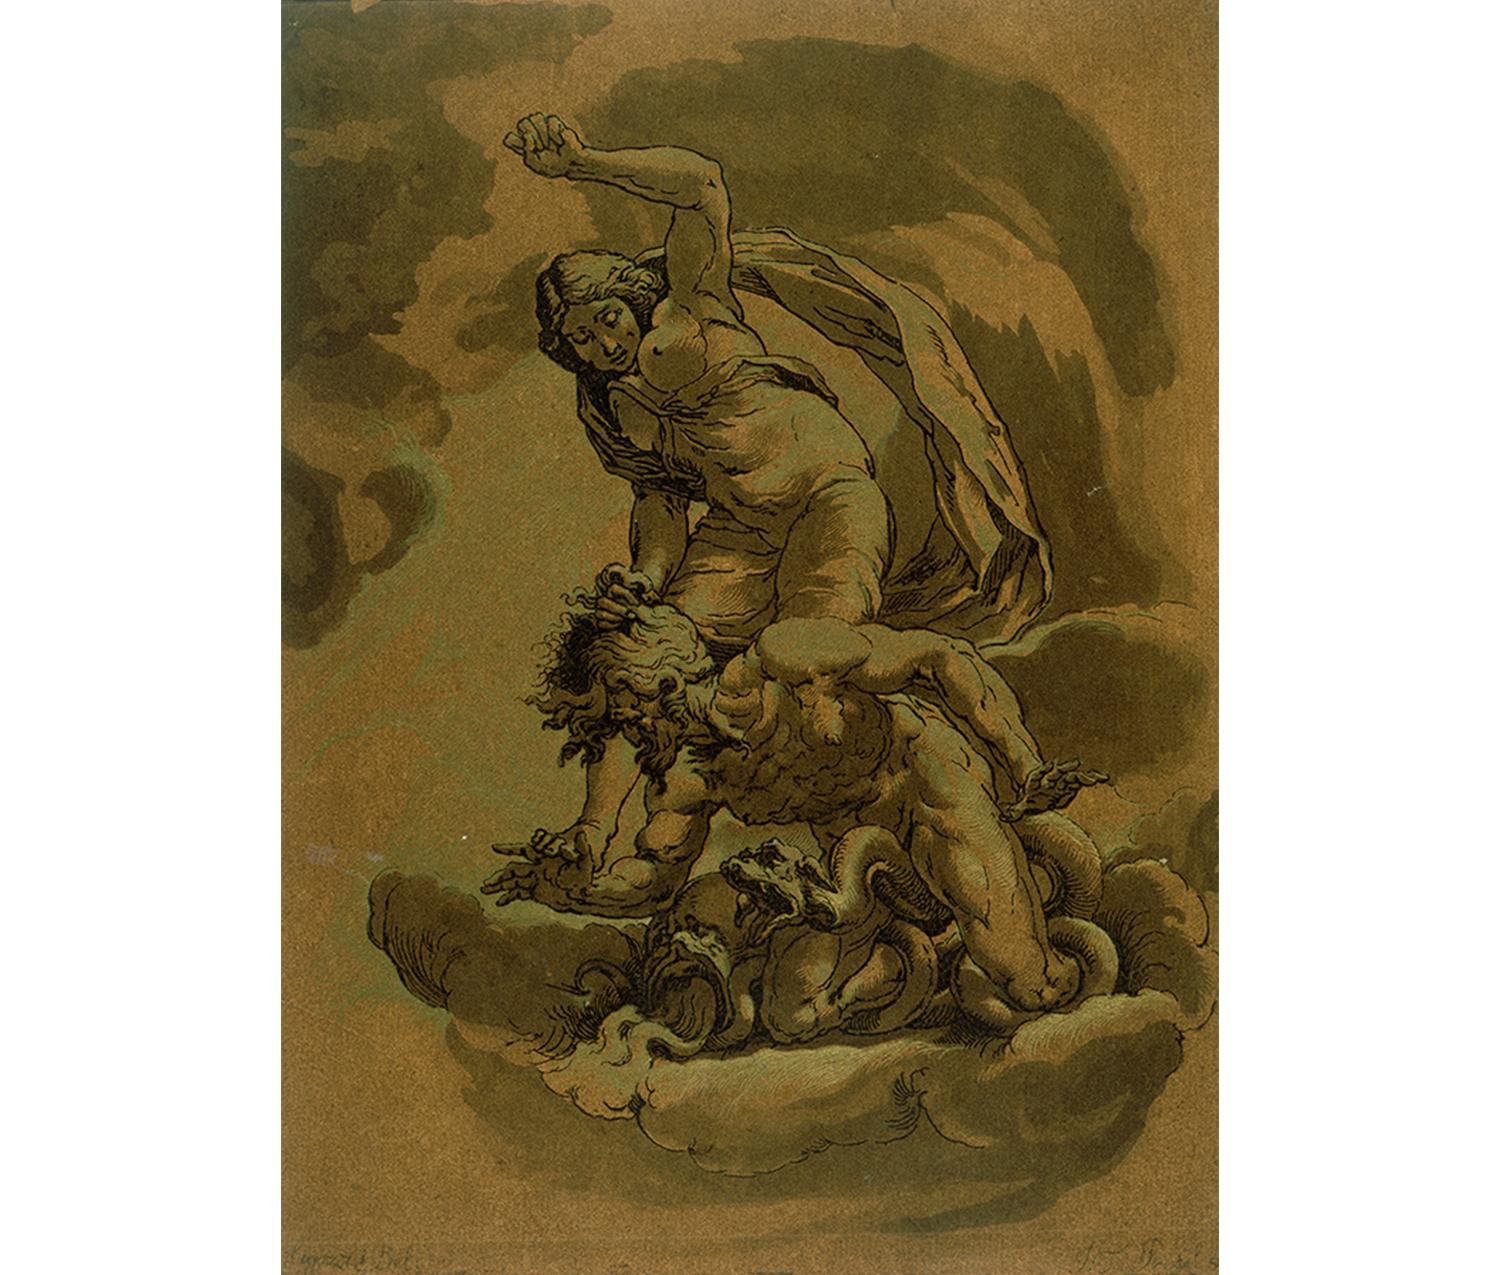 Woman on cloud beating a man who is sitting on a pile of snakes